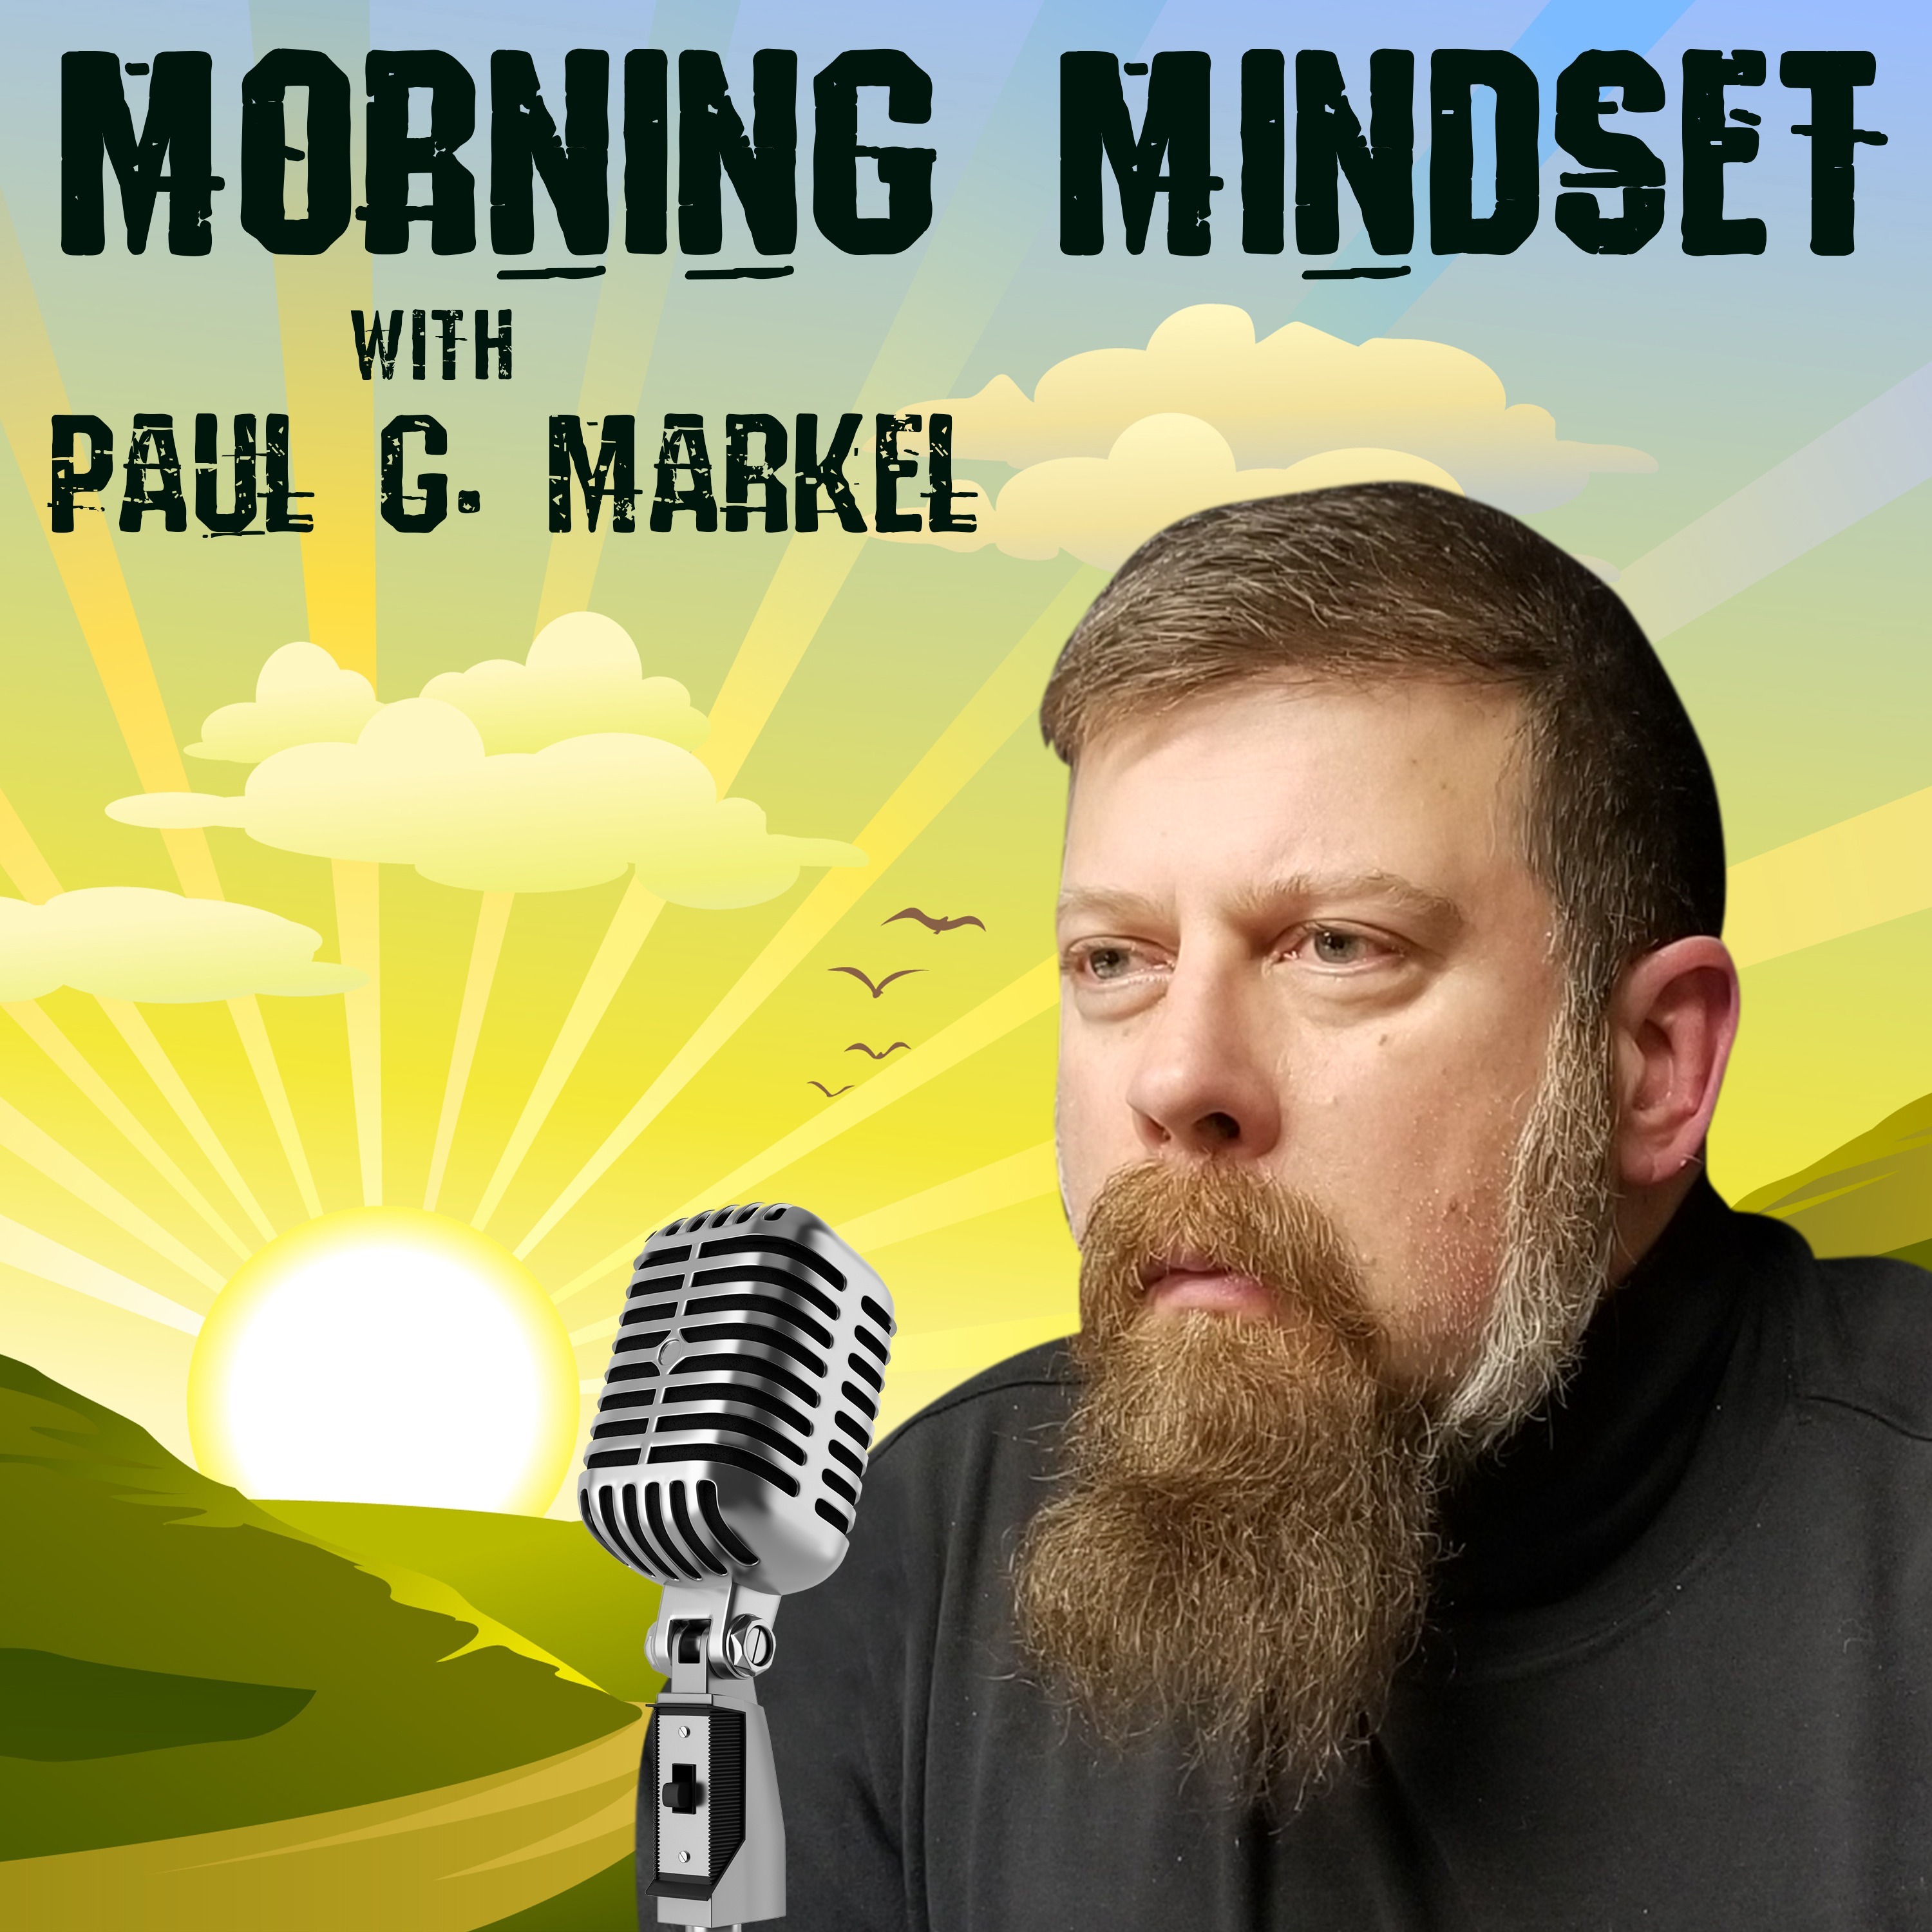 Morning Mindset with Paul G